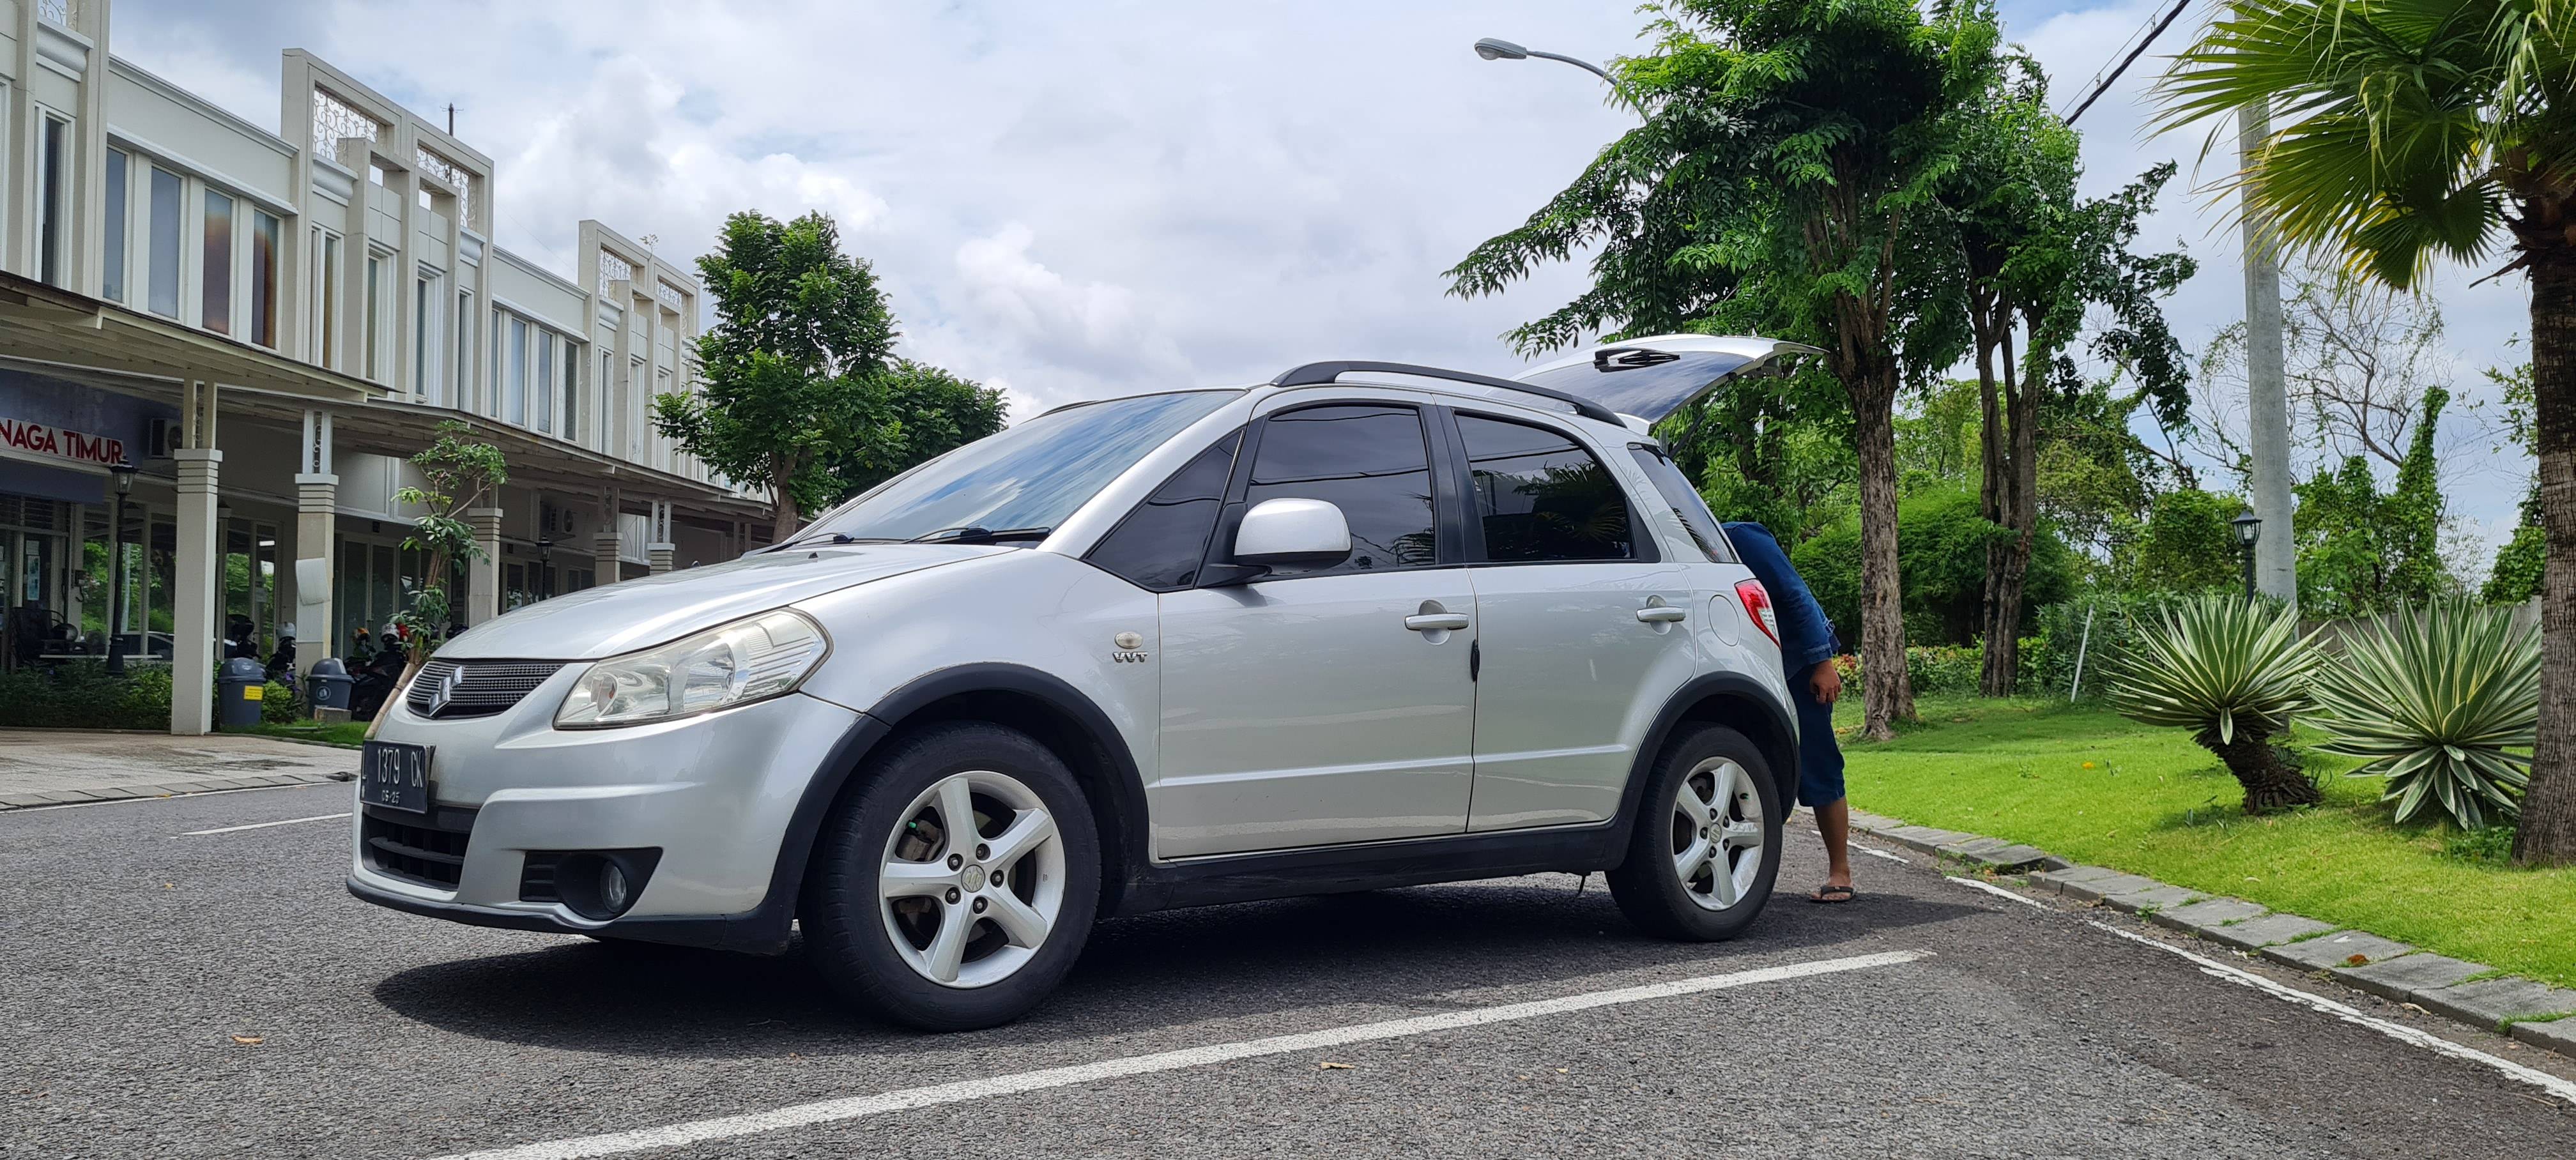 Used 2010 Suzuki SX4 CROSSOVER 1.5L AT CROSSOVER 1.5L AT for sale